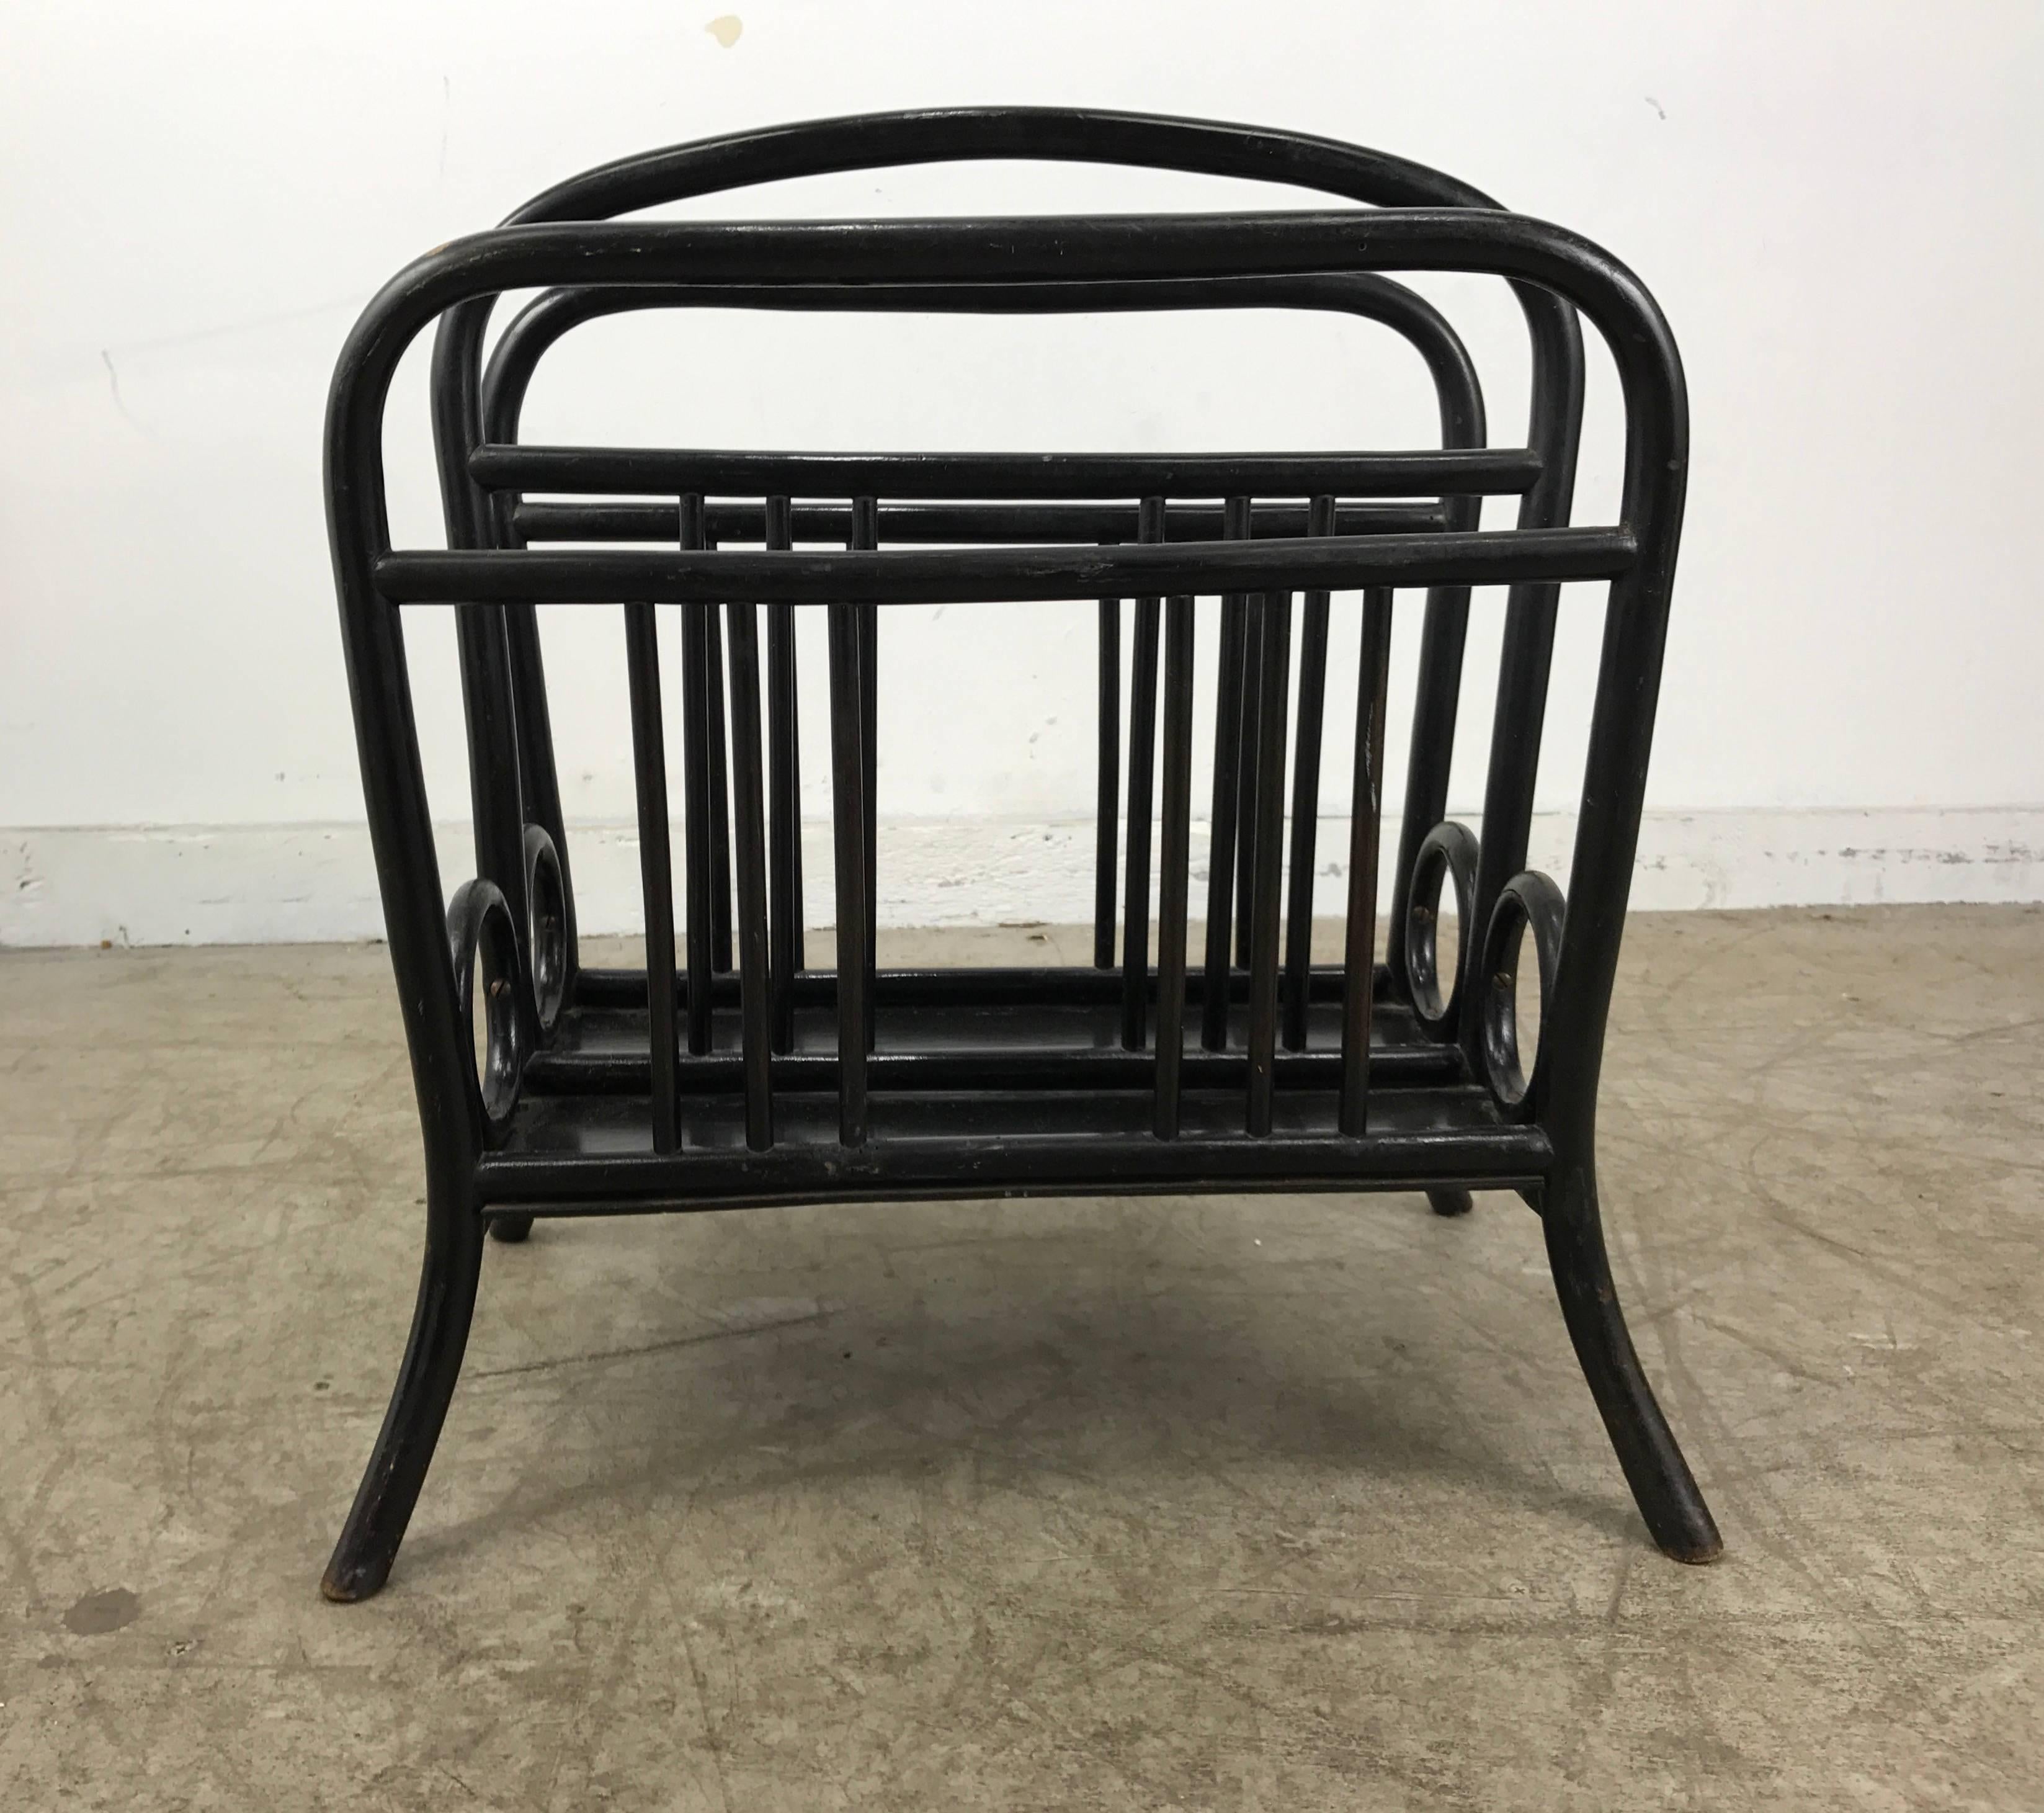 Vienna Secession Early Bentwood Magazine Rack Made by Thonet, Manner of Josef Hoffman